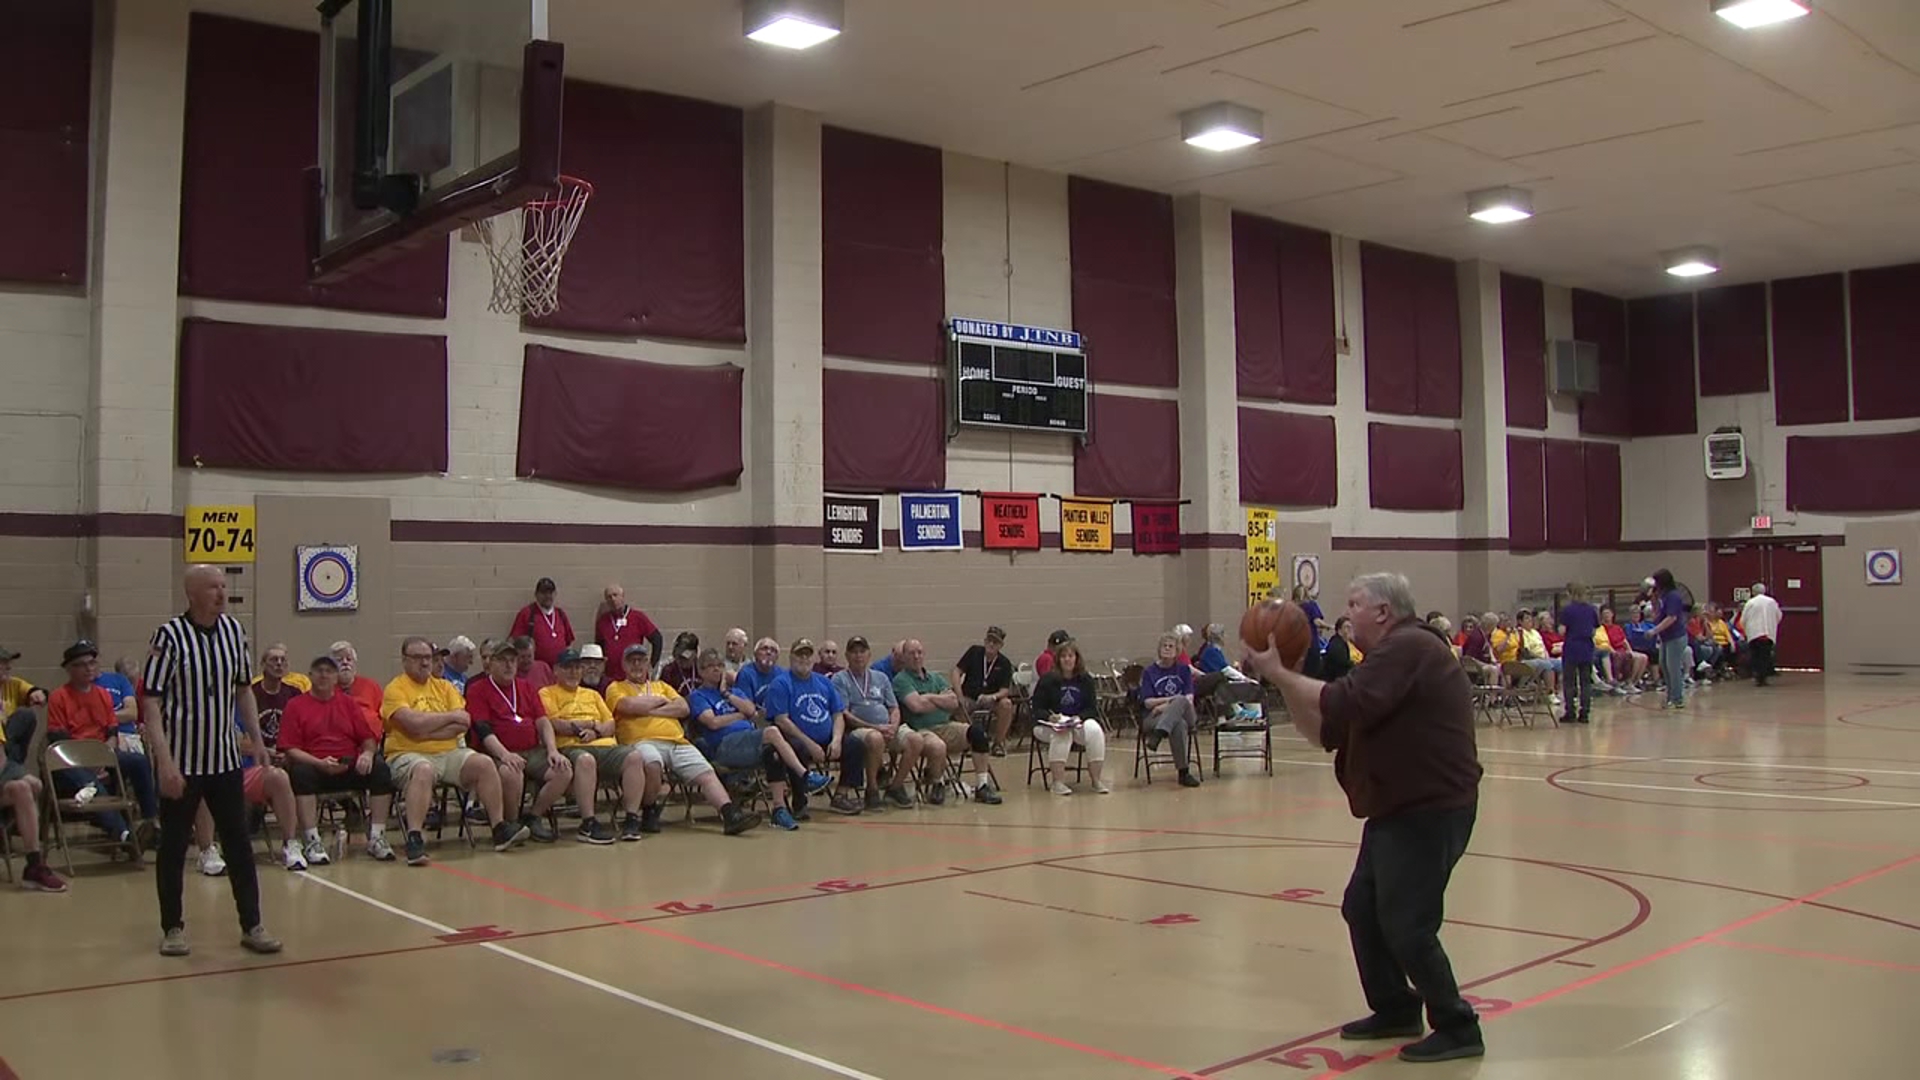 Hundreds of seniors came together in Lehighton for a little friendly competition and good company.